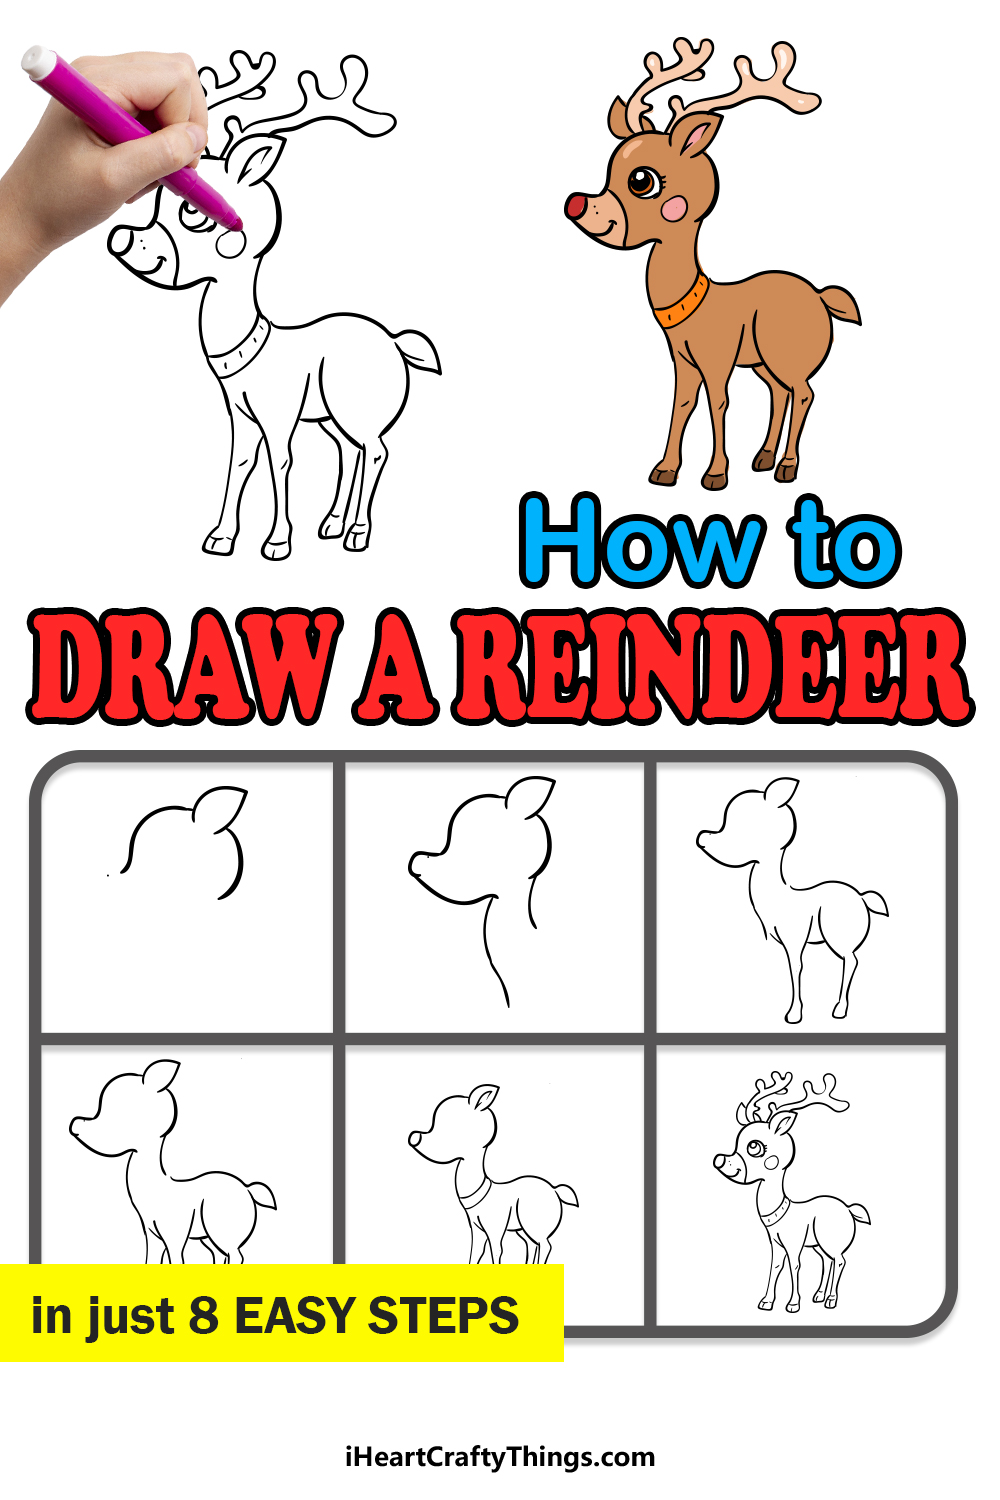 how to draw a reindeer in 8 easy steps